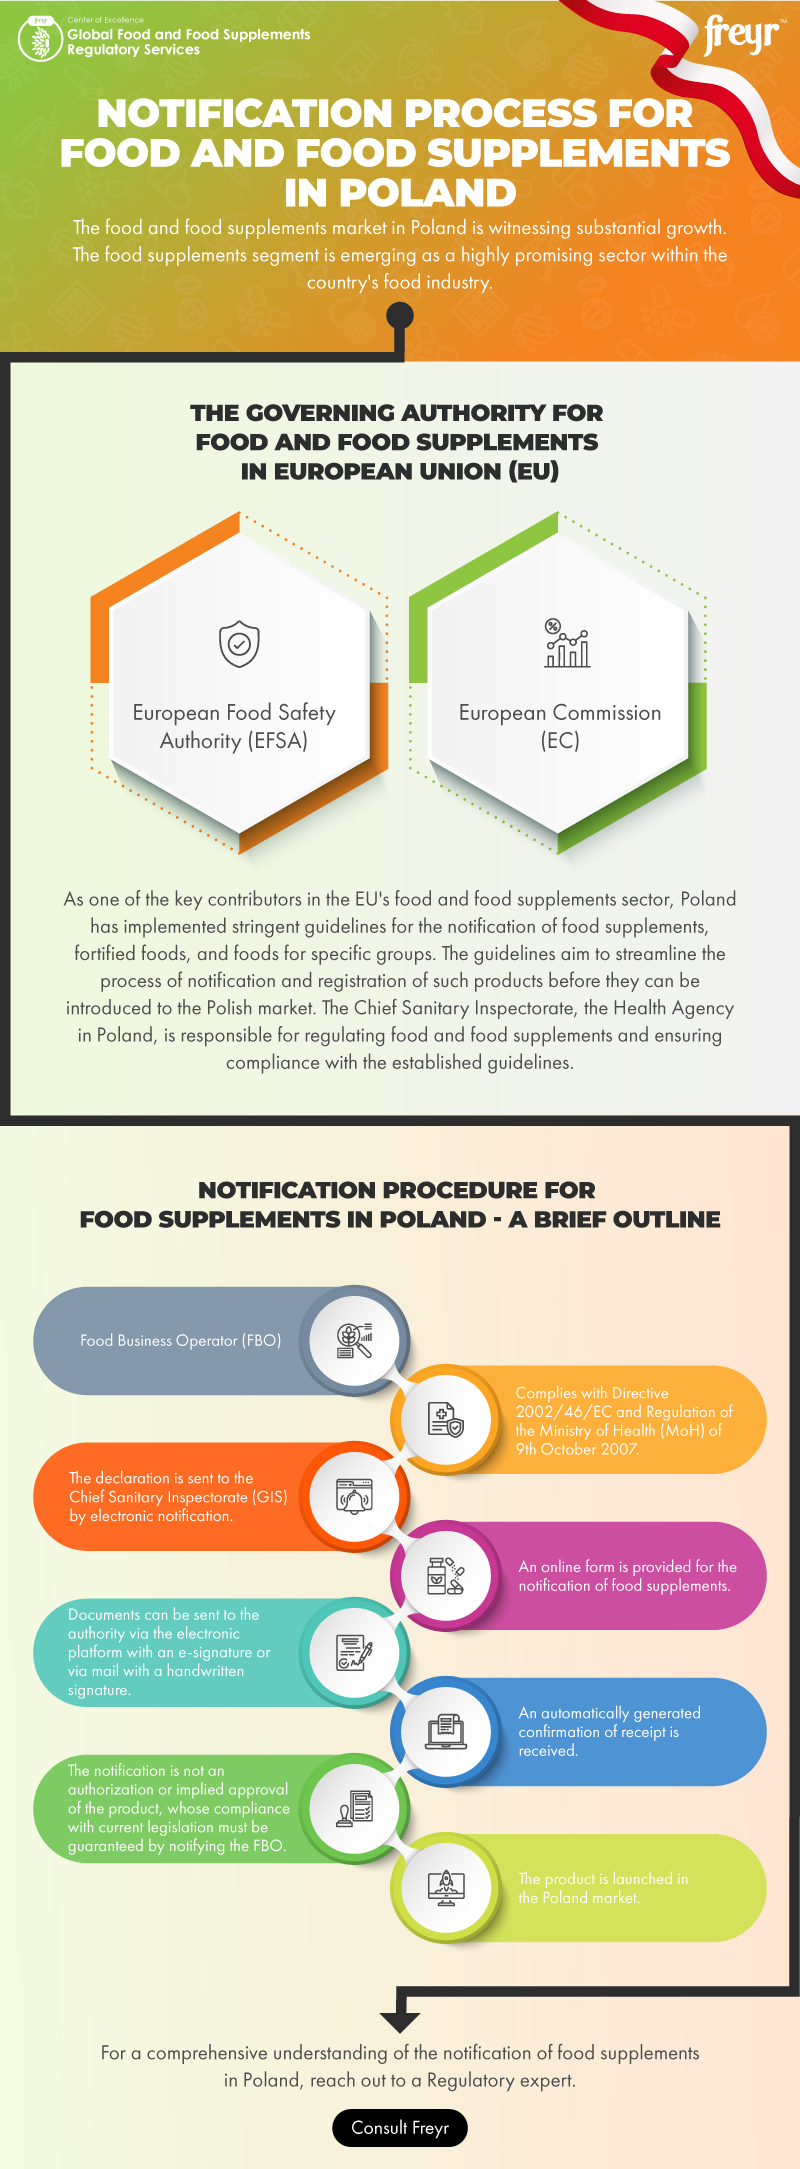 Notification Process for Food and Food Supplements in Poland